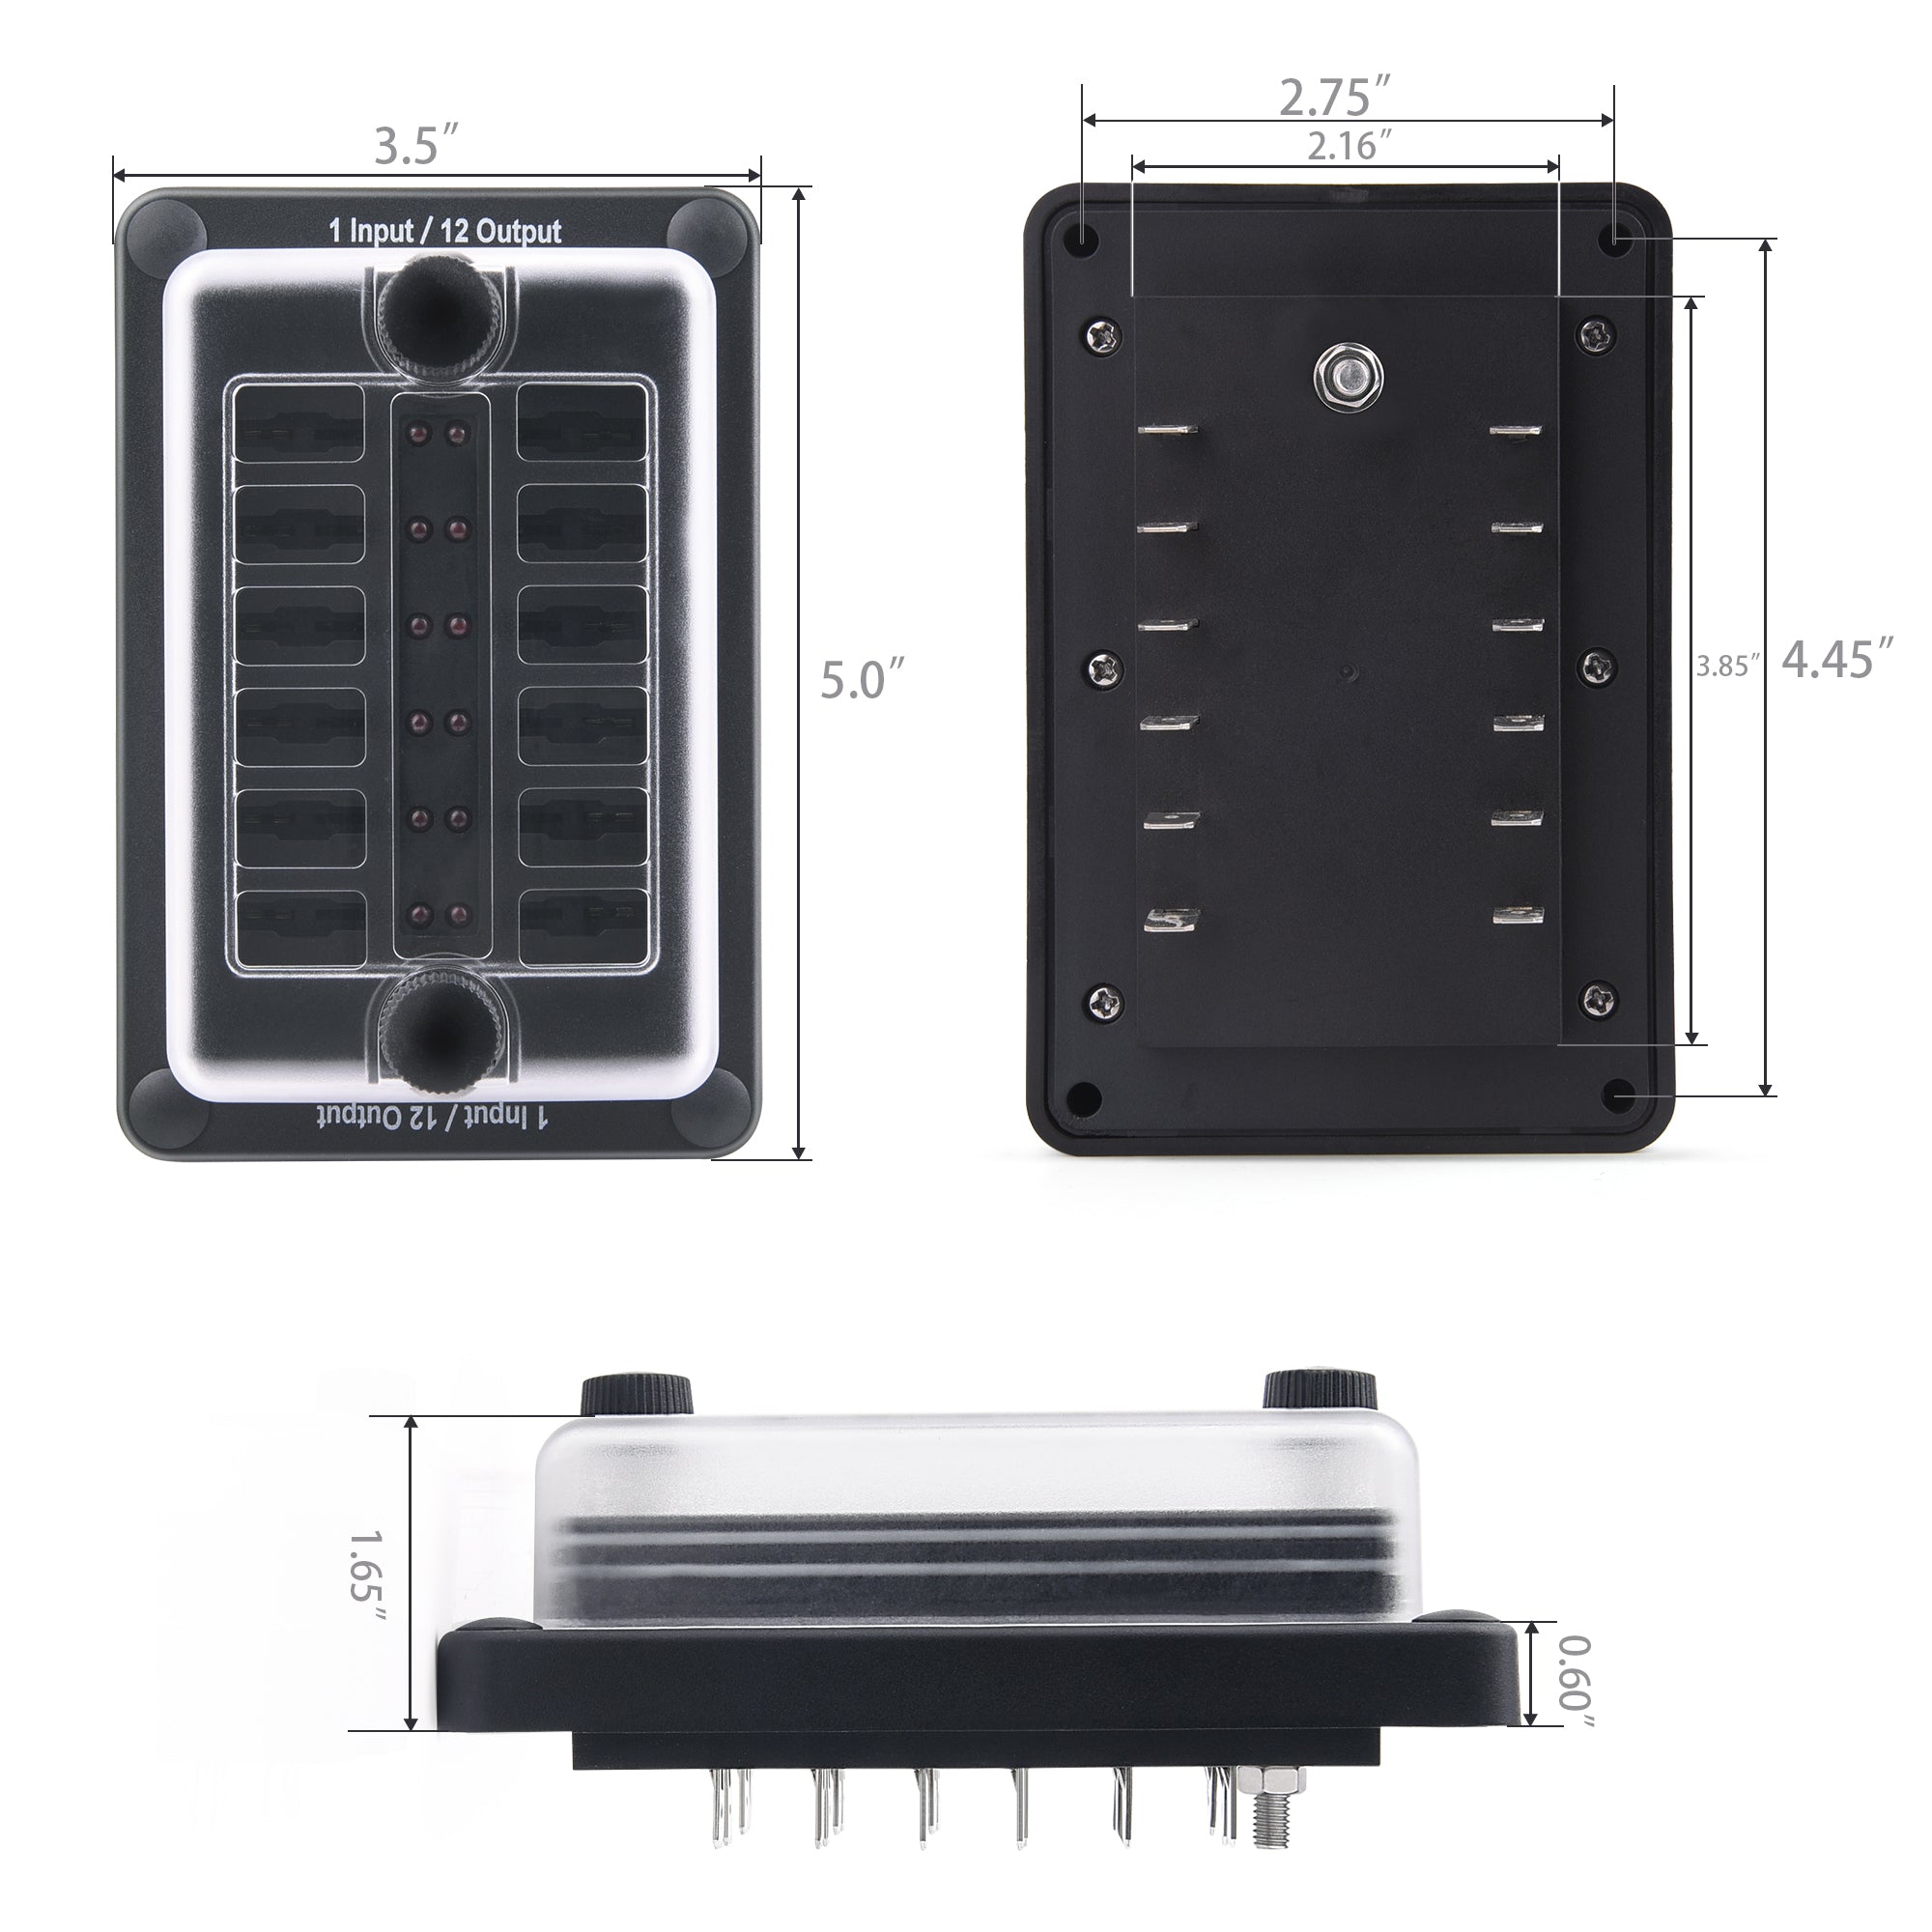 Fuse Block Holder 6/12 Circuit Blade Fuse Box with Waterproof Protection Cover Sticker Labels LED Indicator